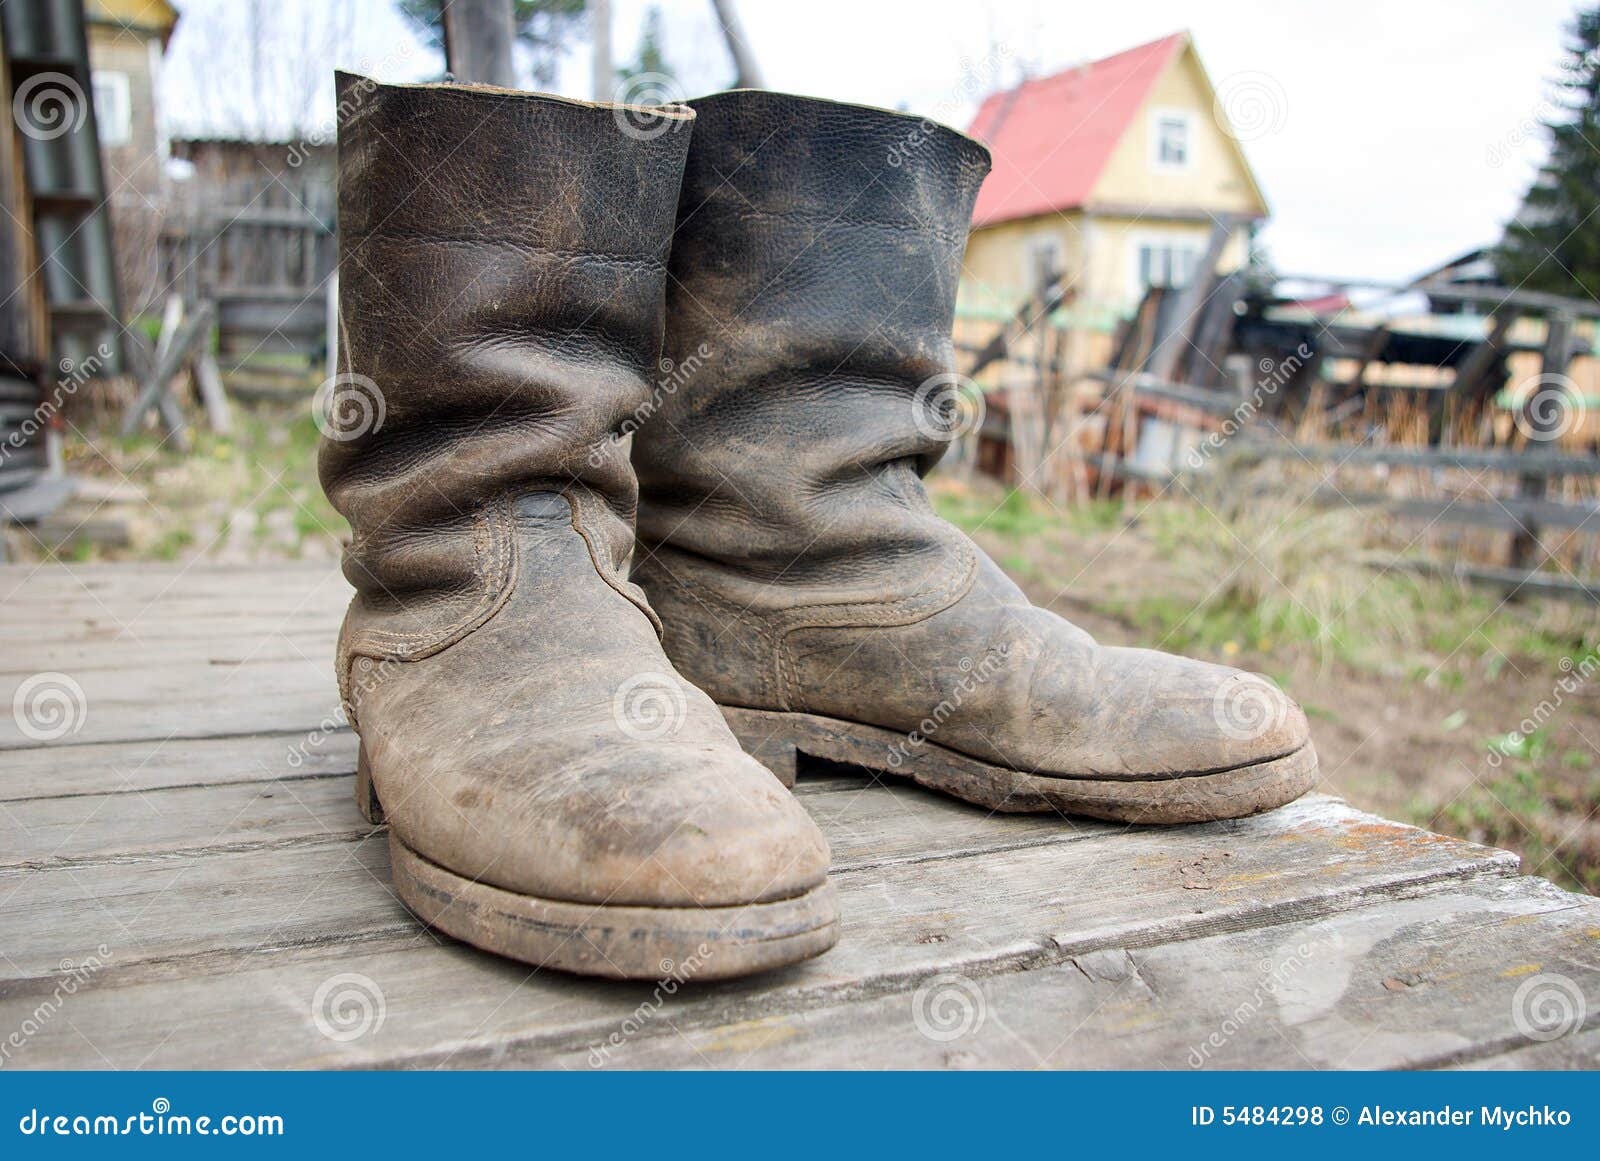 Old muddy farmers boots stock photo. Image of breeding - 5484298